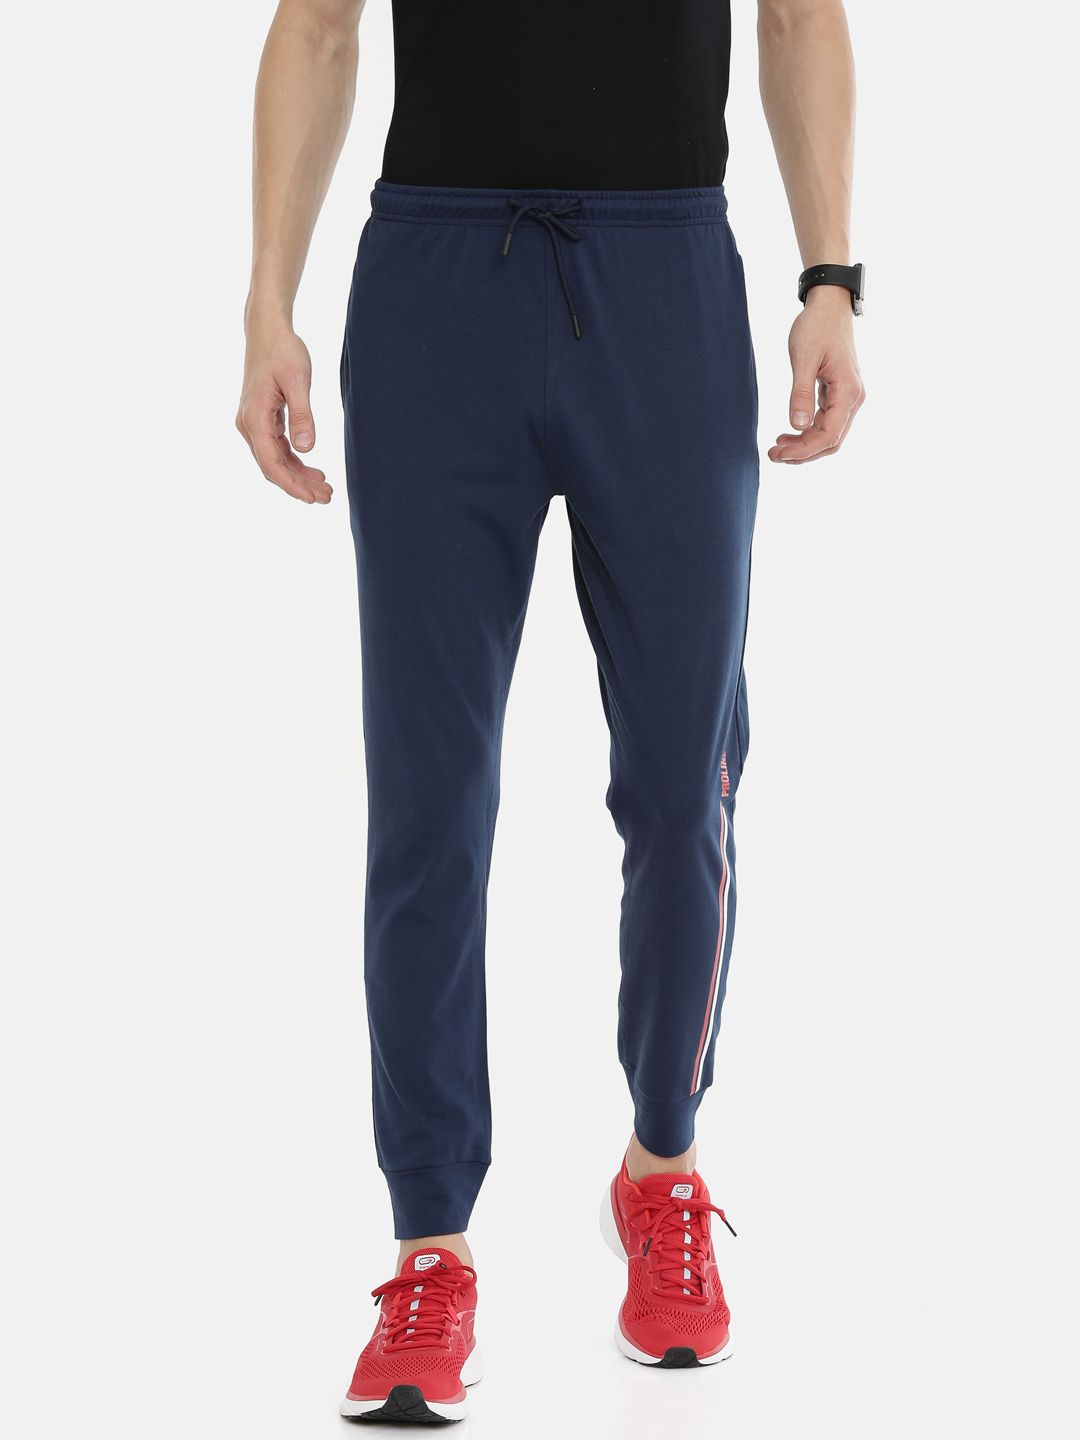 Buy Black Track Pants for Men by Free Authority Online  Ajiocom